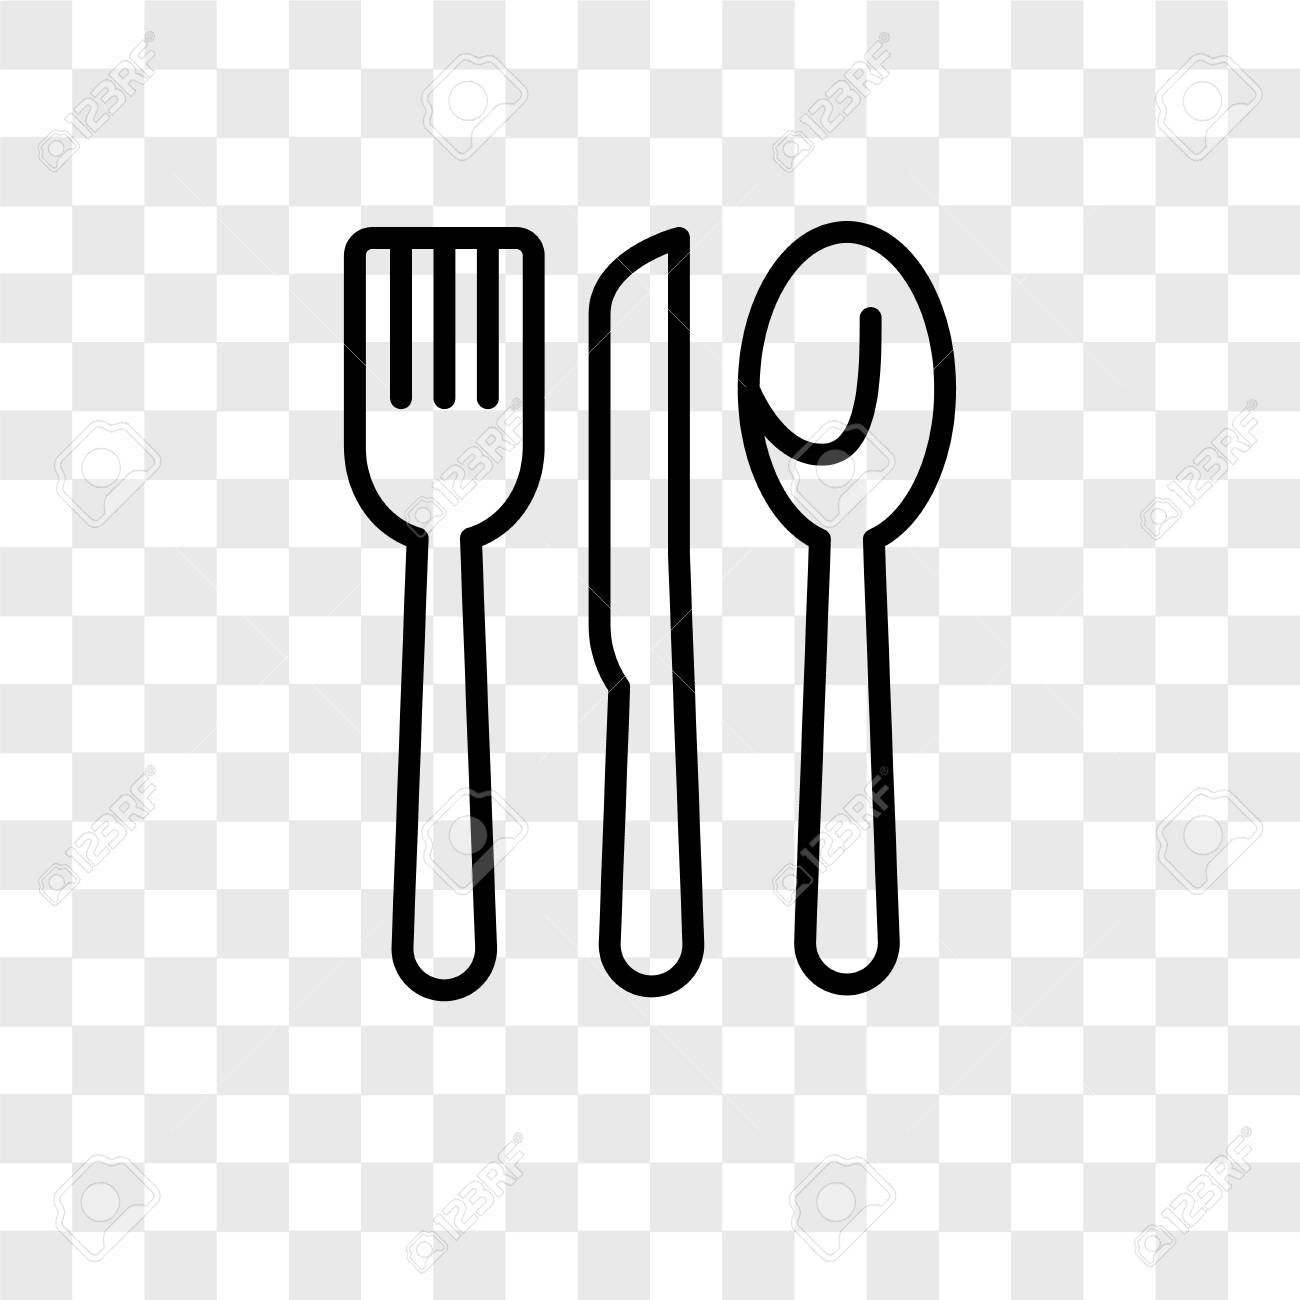 Cutlery Vector Icon Isolated On Transparent Background